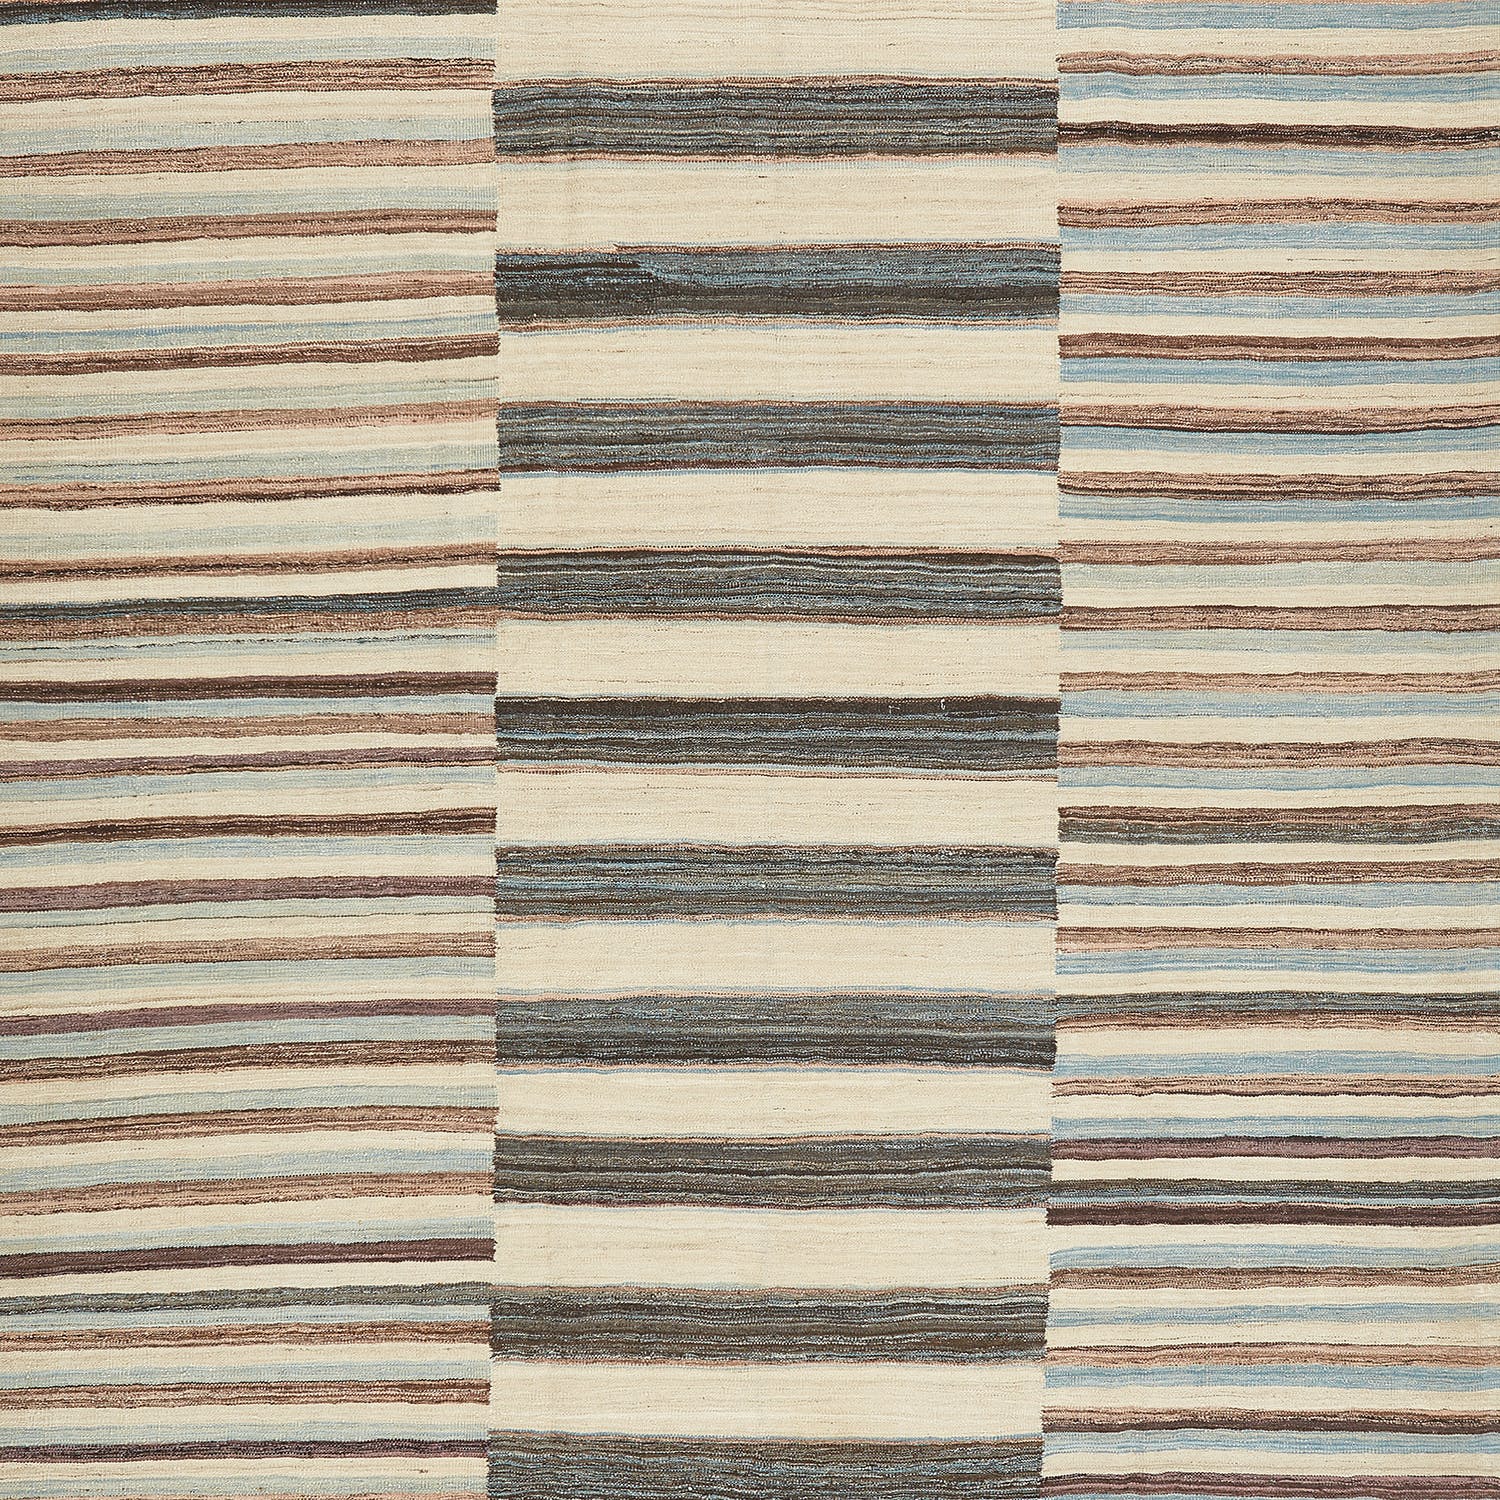 Close-up of a textured, striped pattern in earthy tones.